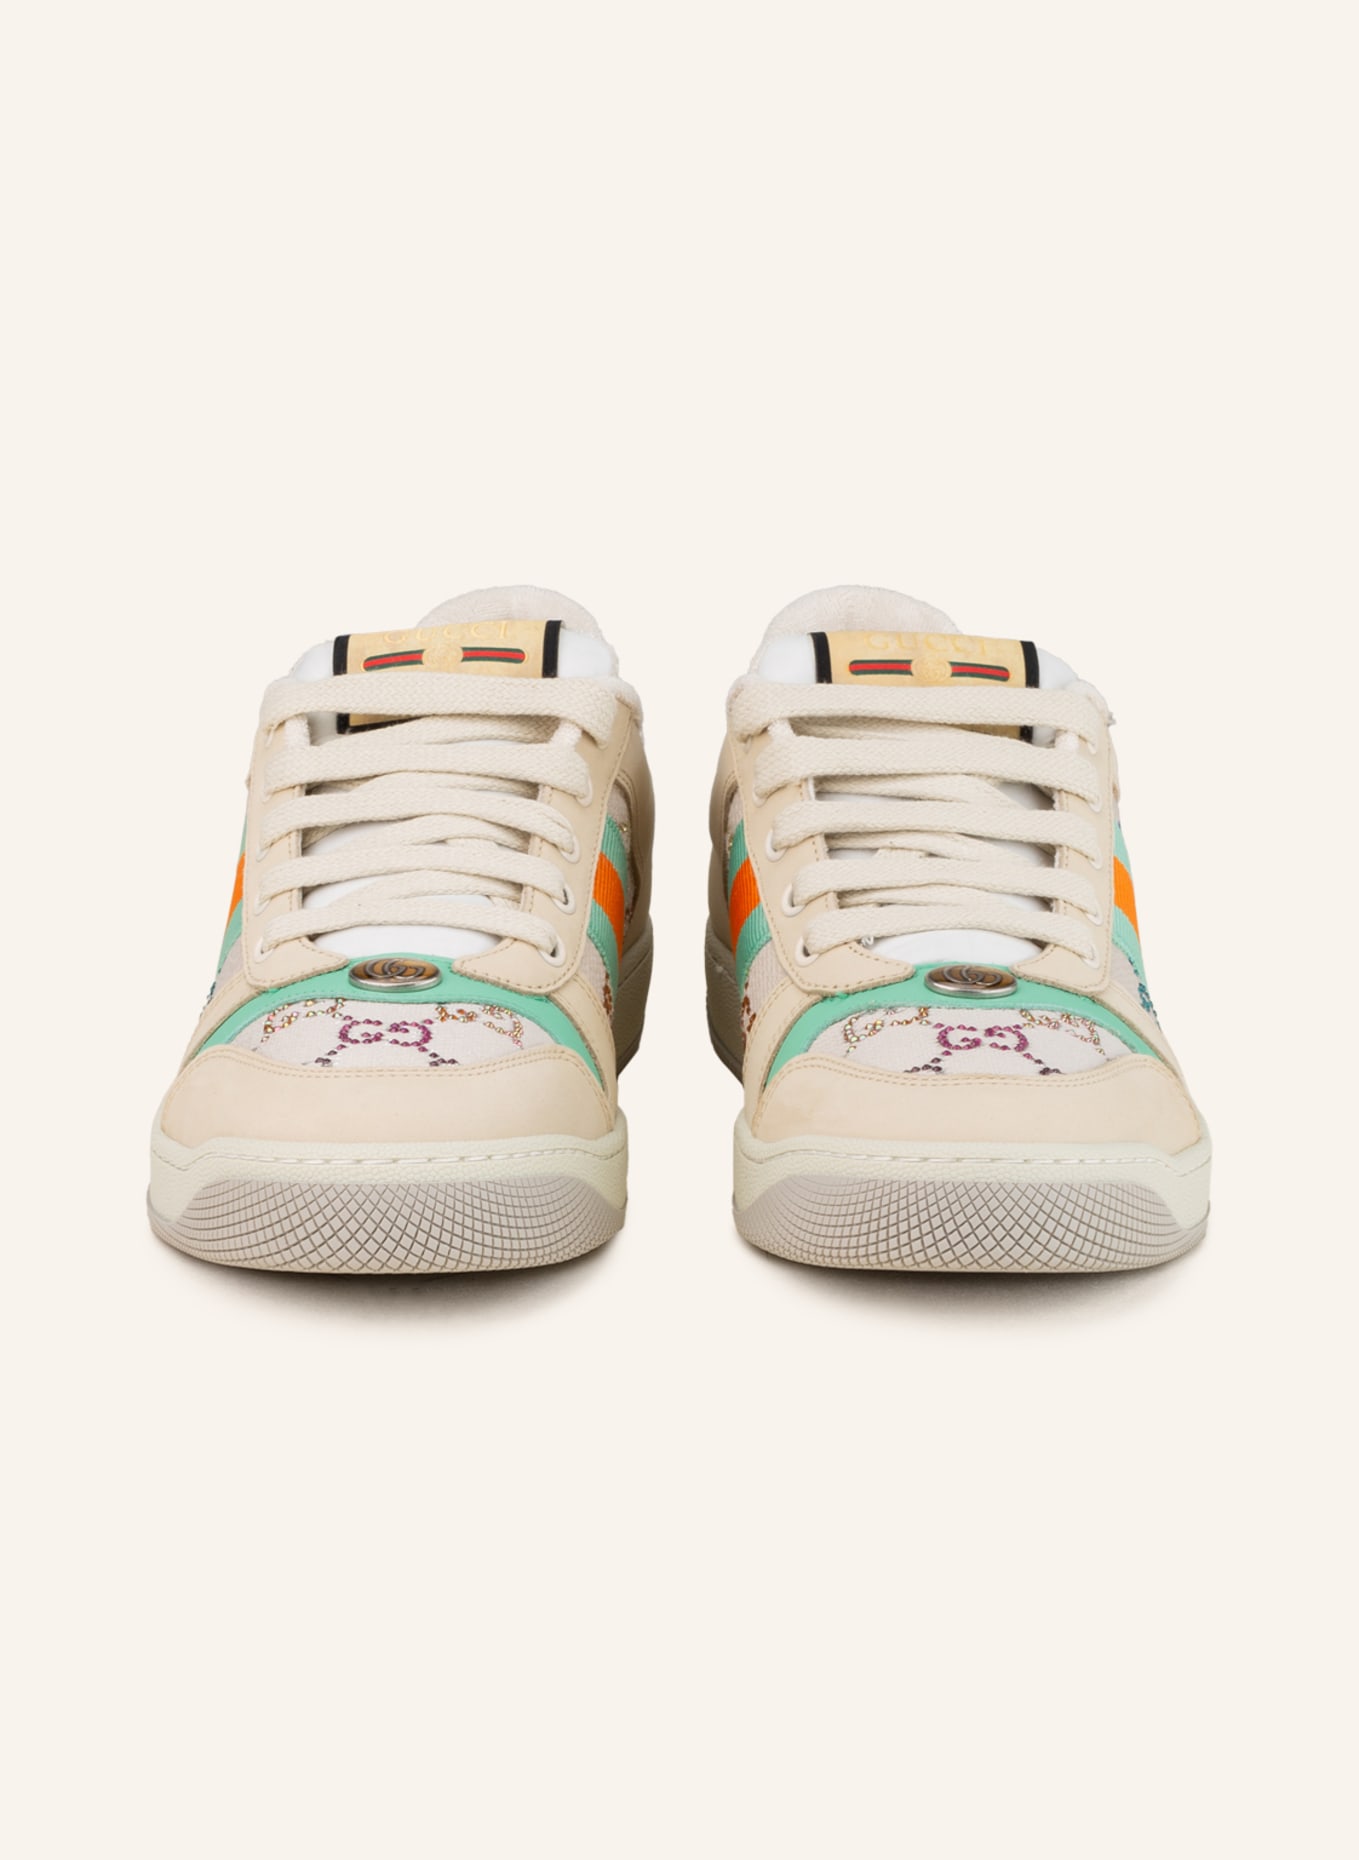 GUCCI Sneakers with decorative gems, Color: BEIGE/ ORANGE/ MINT (Image 3)